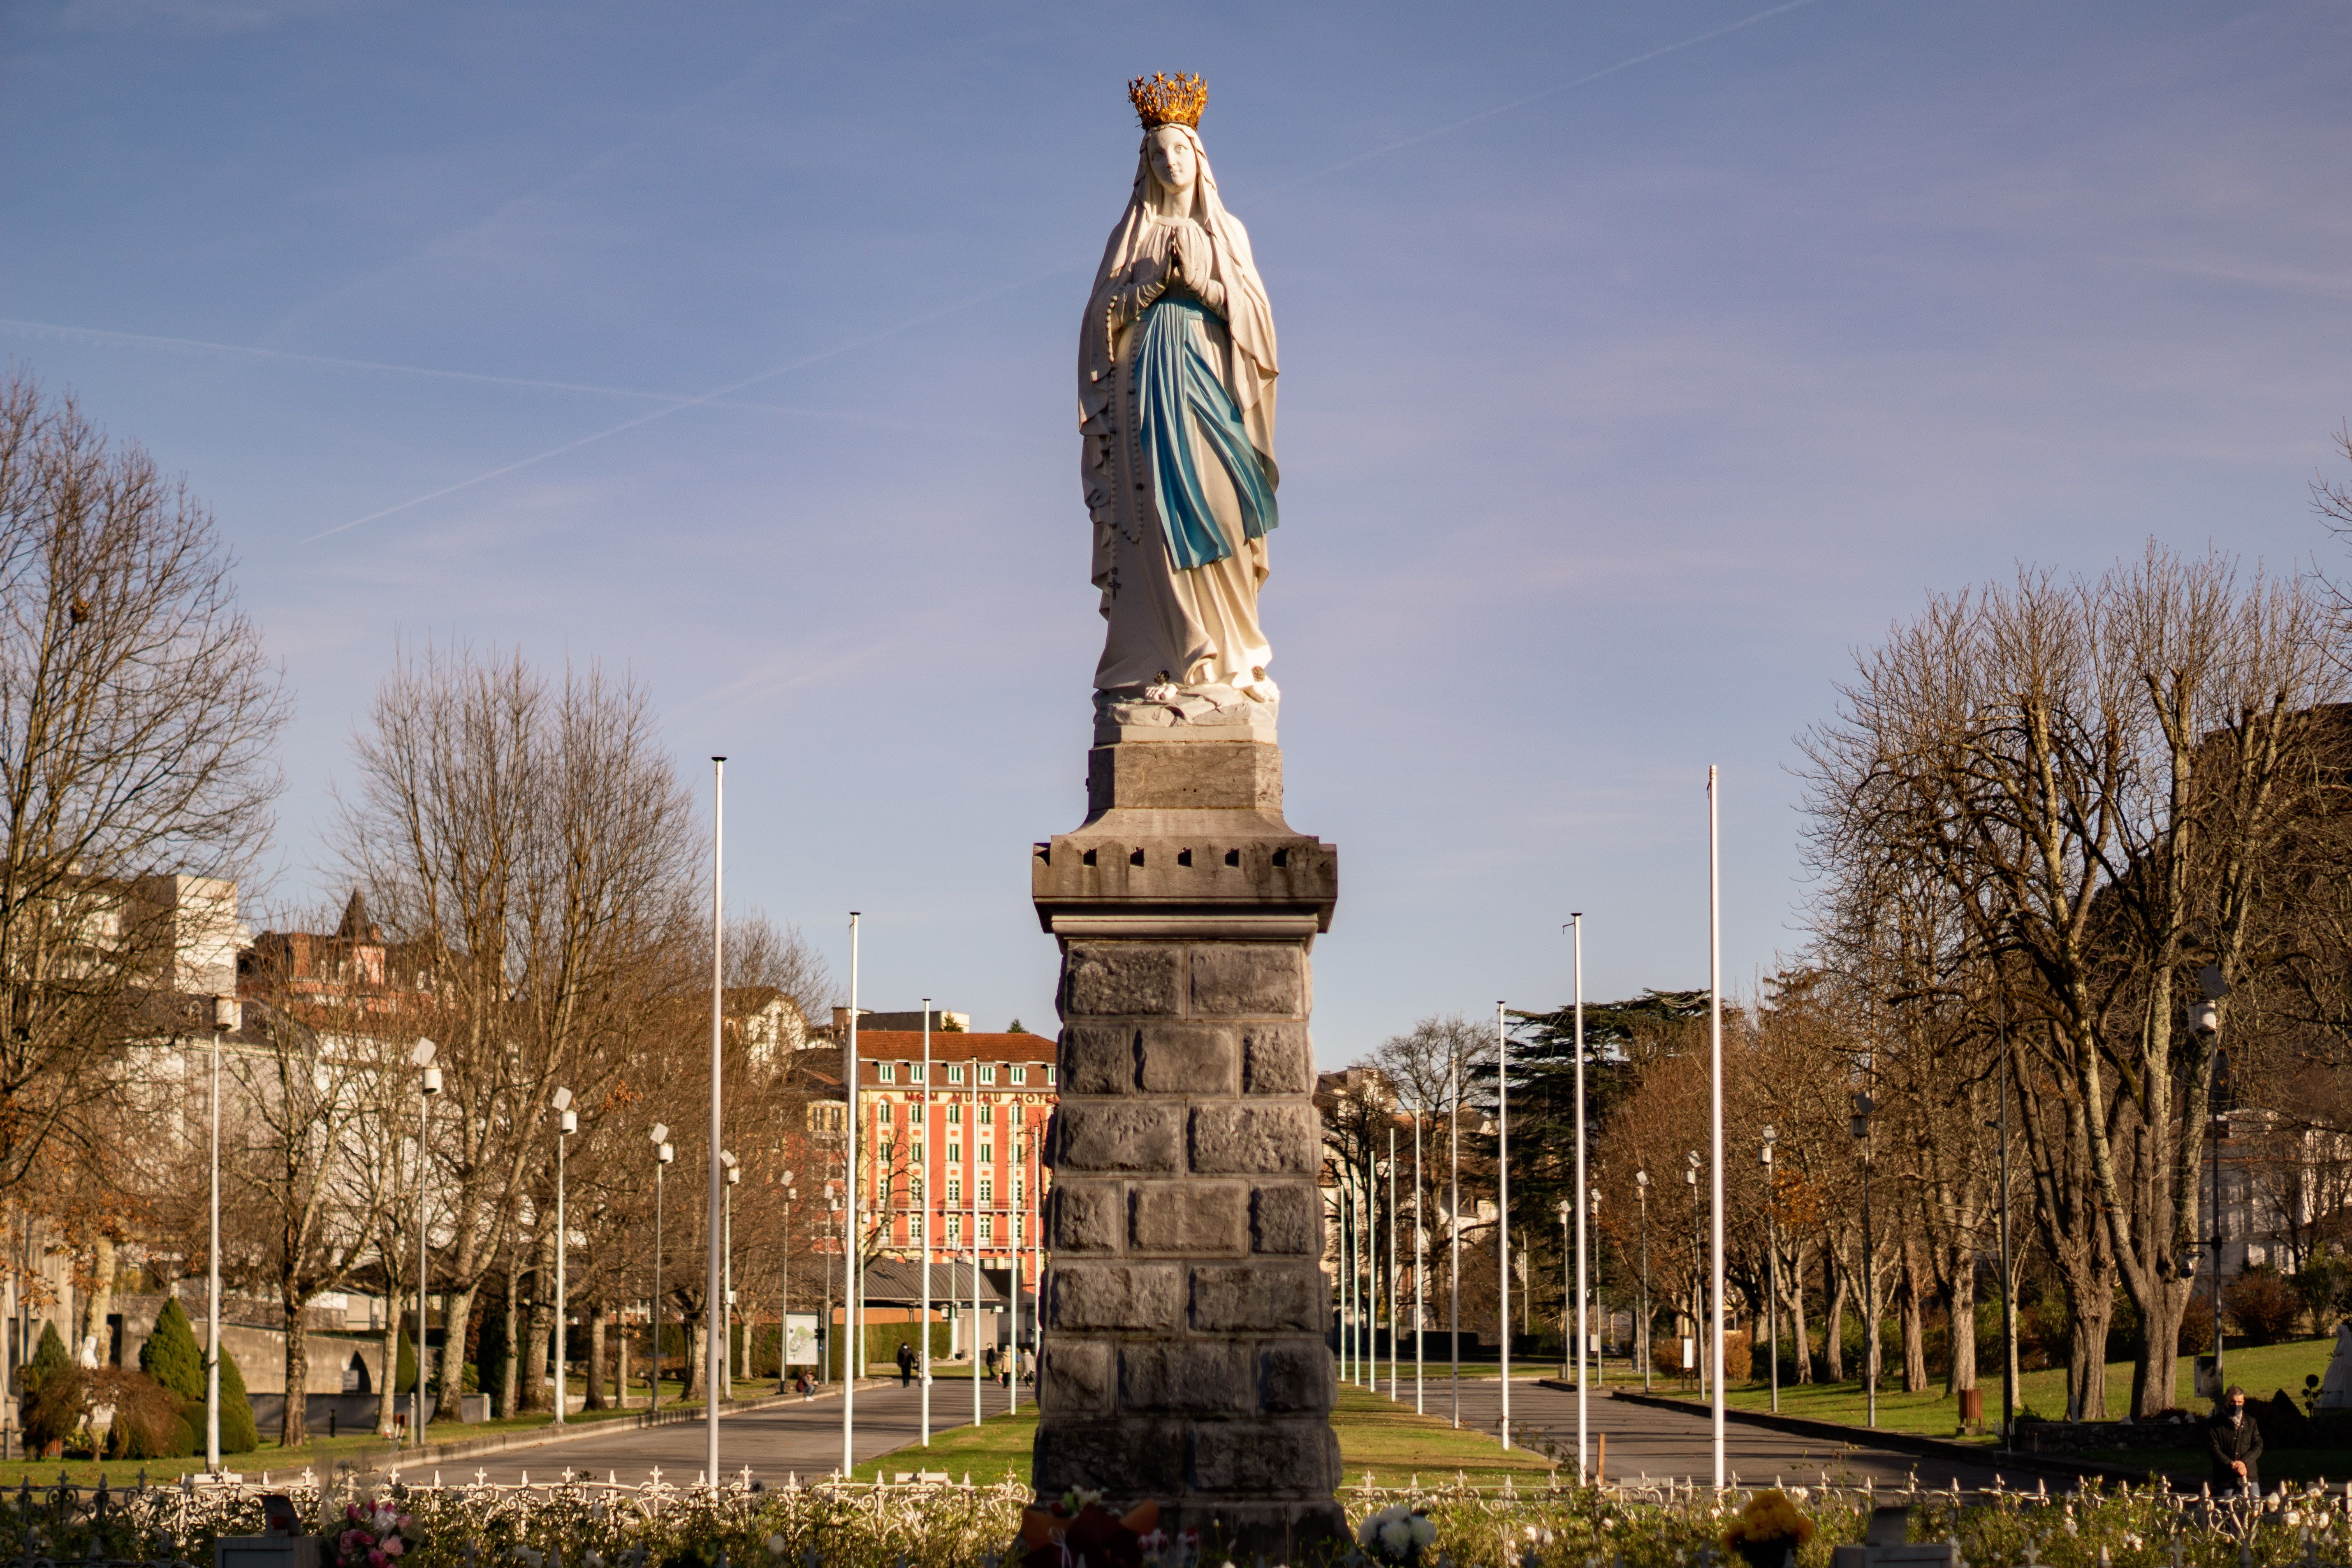 Image of Virgin Mary in Lourdes, France